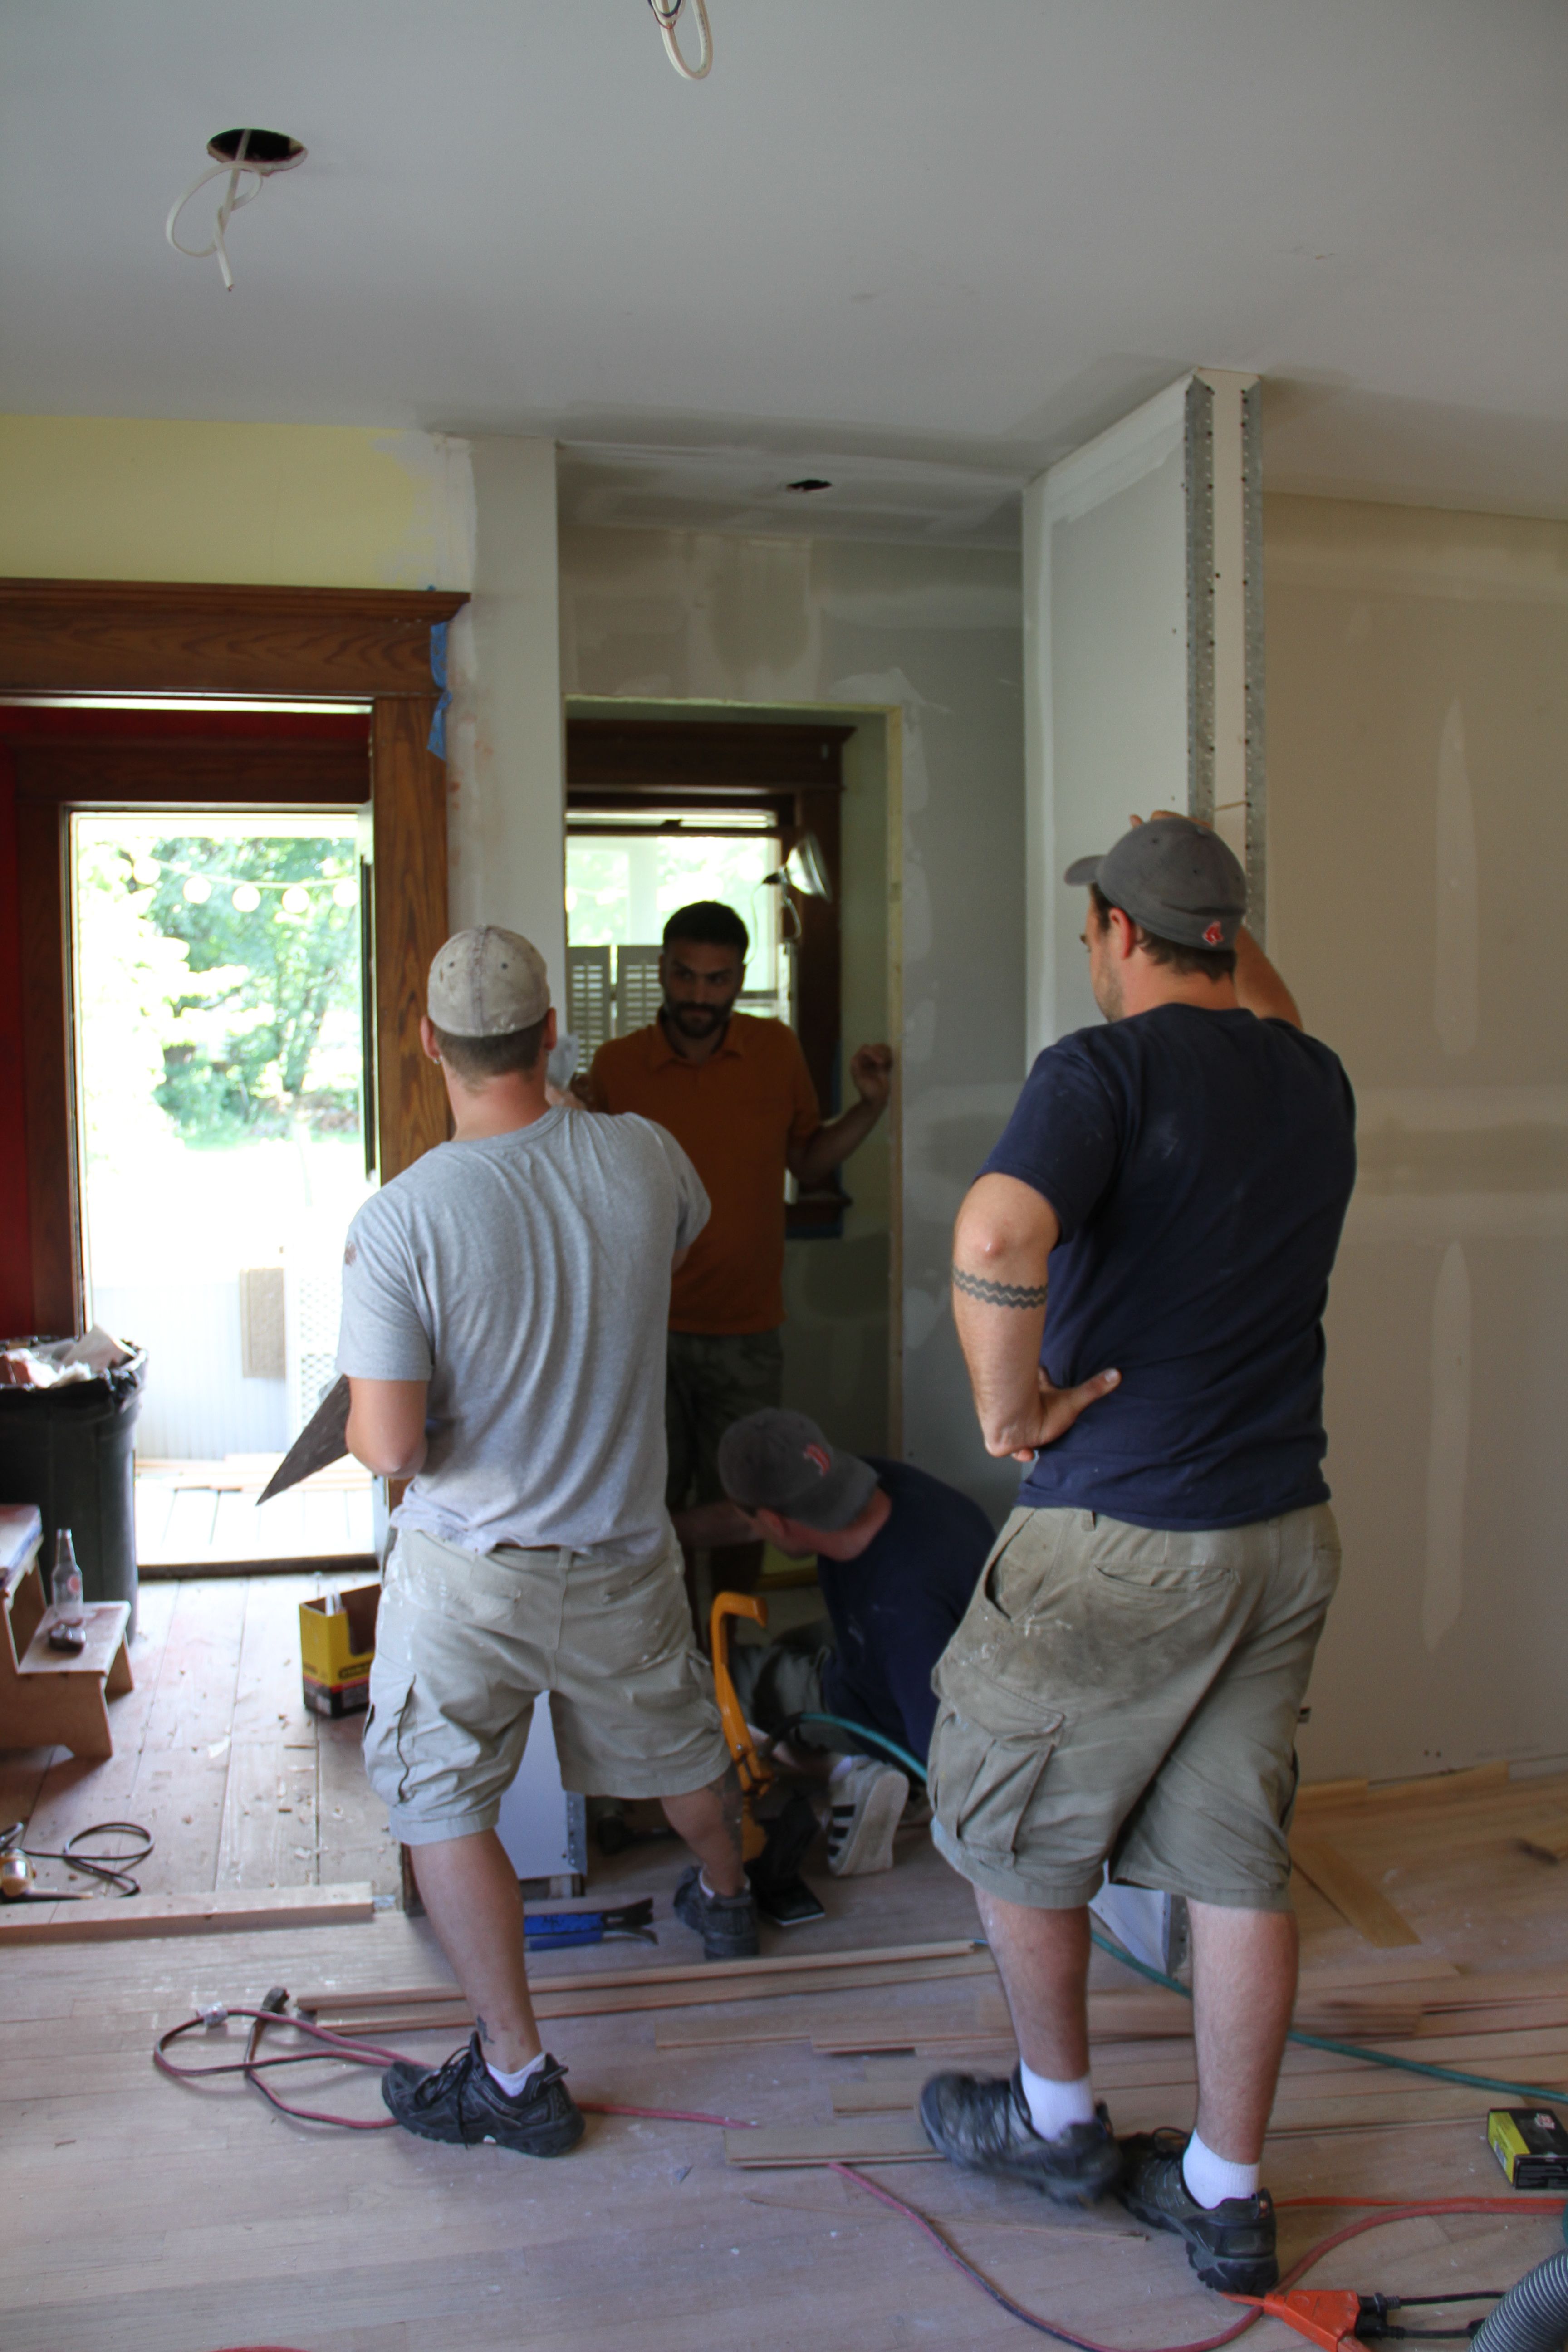 How many guys can we squeeze into a tiny space? There's Caleb inspecting the space for his tile requirements.